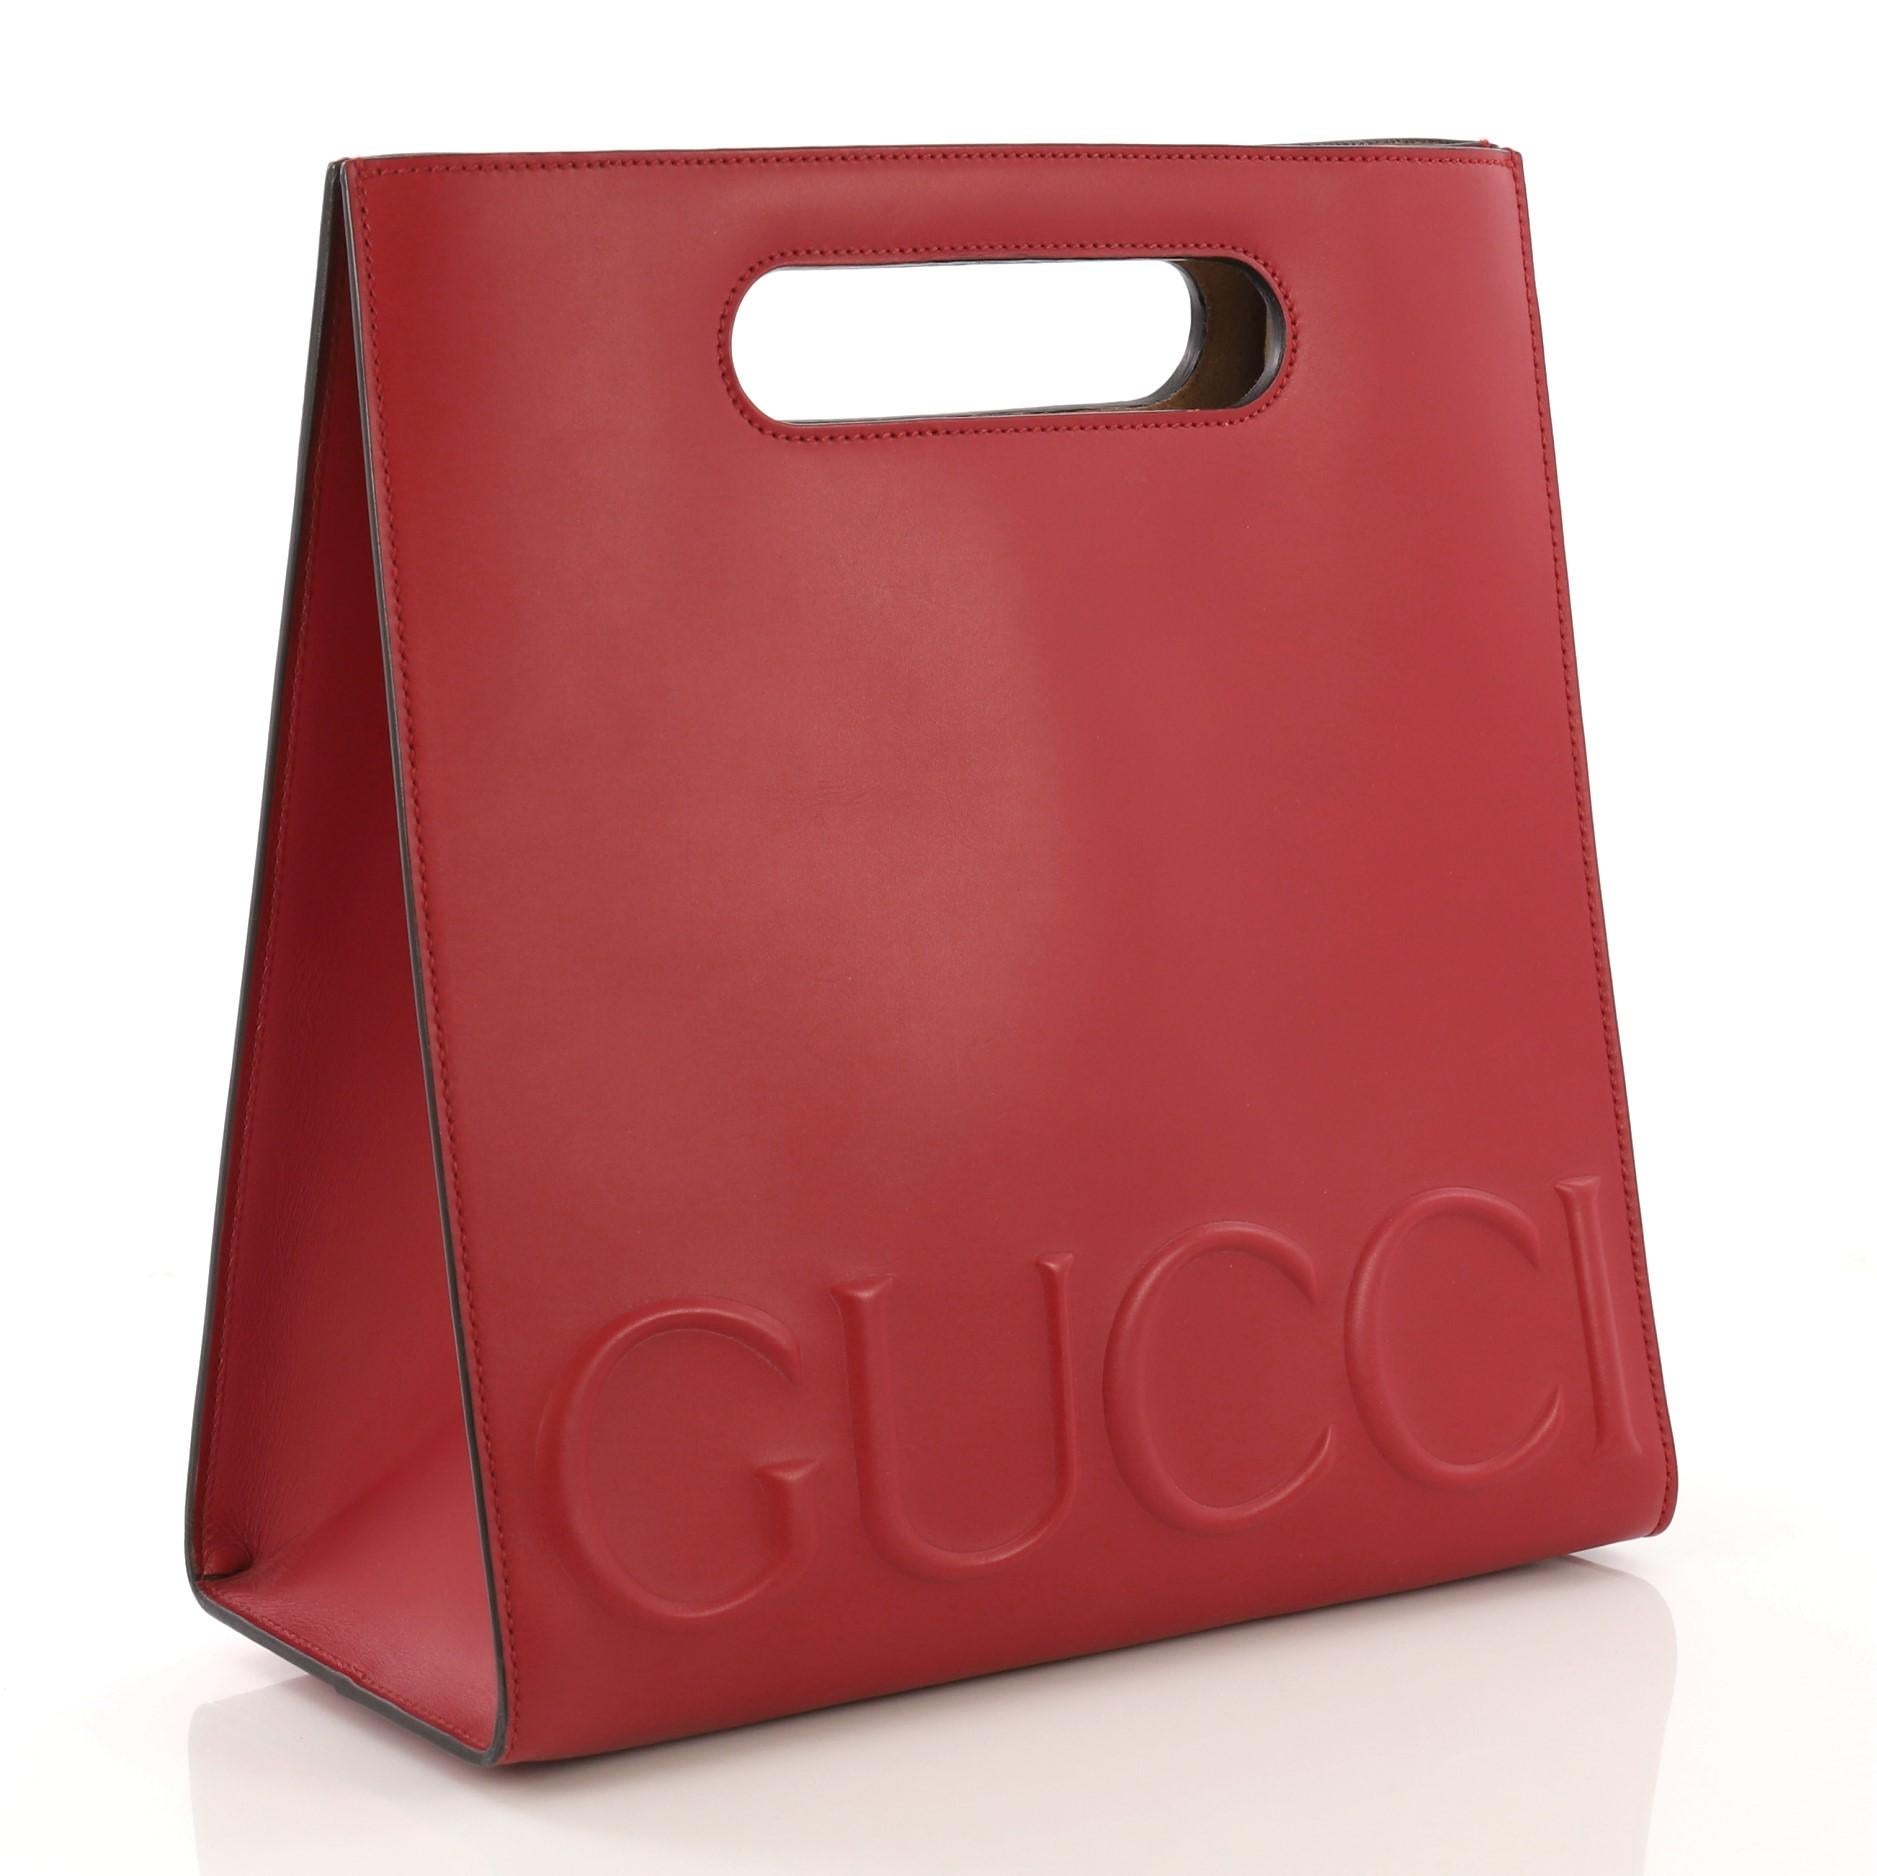 This Gucci XL Tote Leather Small, crafted from red leather, features cut out top handles and embossed Gucci logo. Its wide open top showcases a beige microfiber interior. **Note: 

Estimated Retail Price: $2,490
Condition: Excellent. Faint scuffs